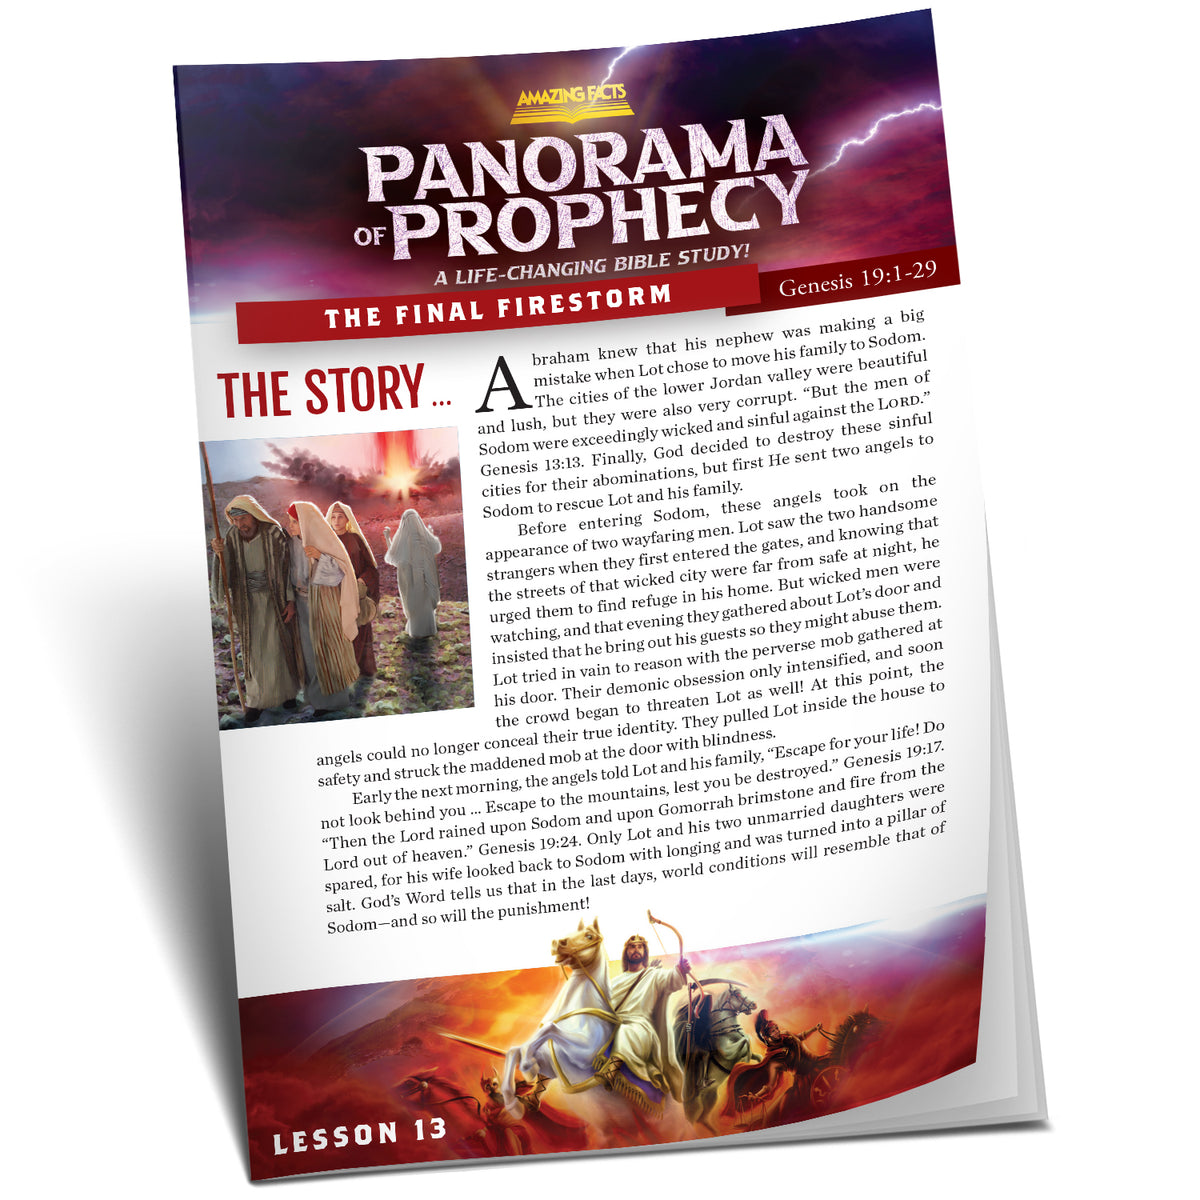 Panorama of Prophecy: The Final Firestorm Study Guide 13 by Doug Batchelor